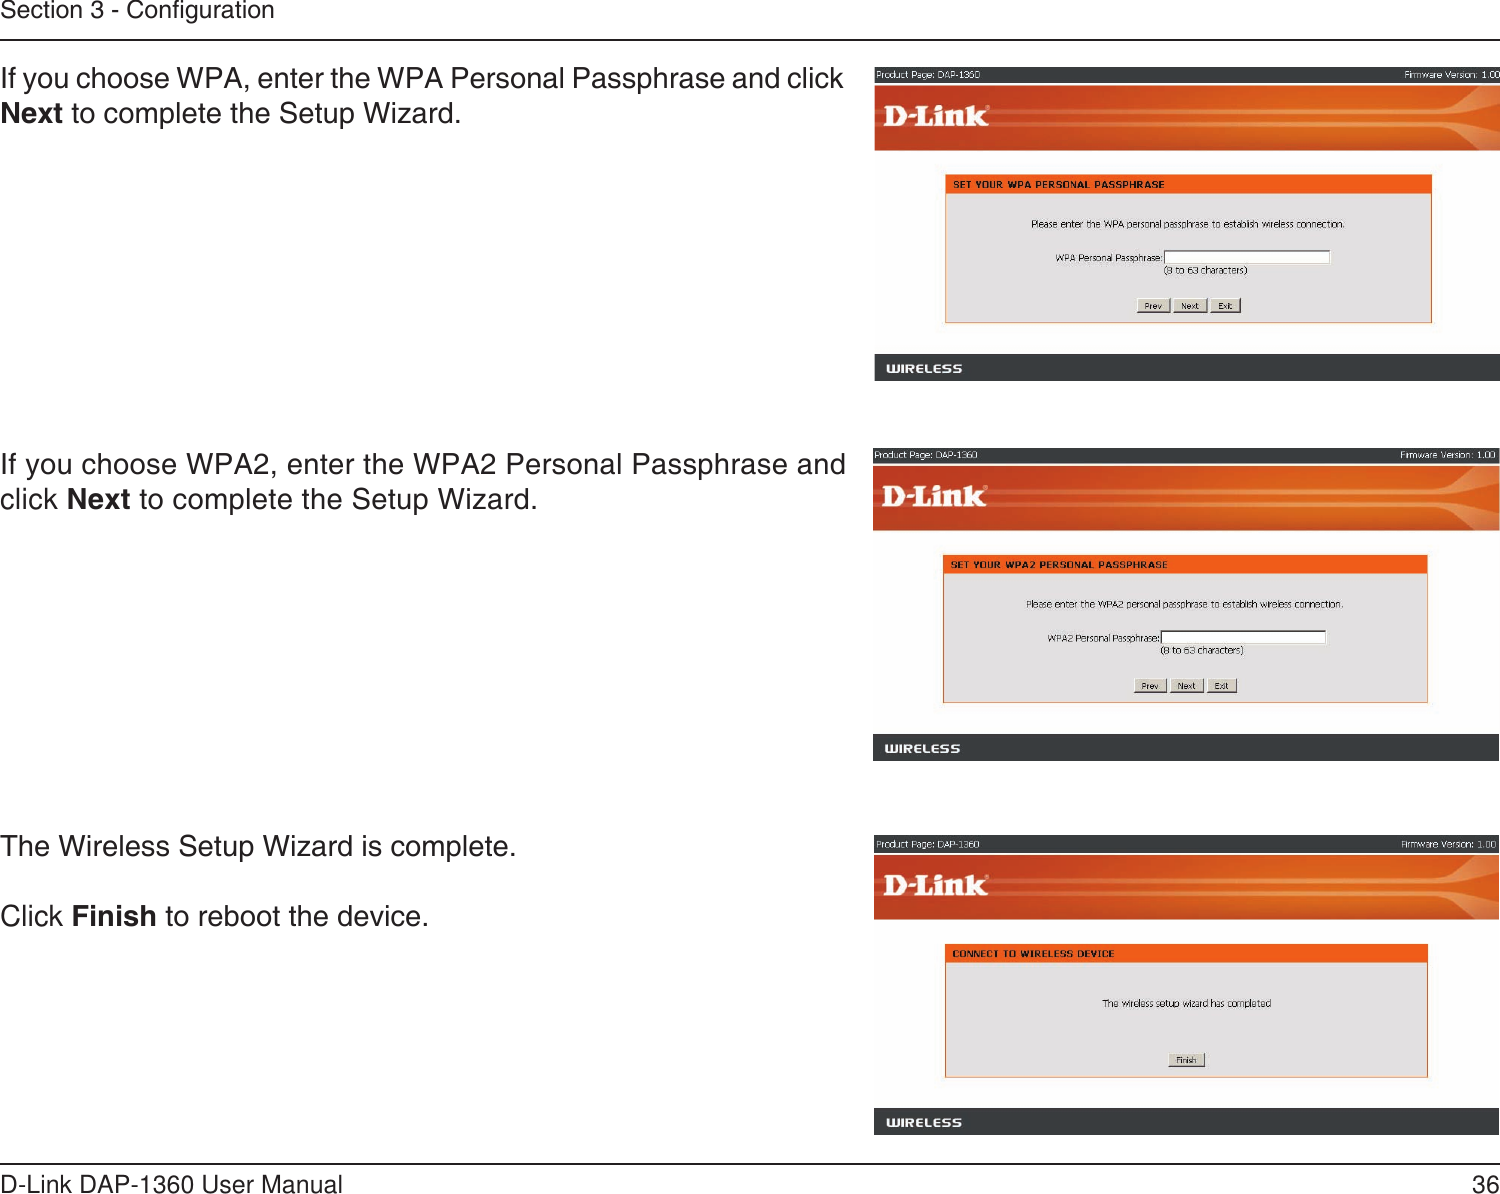 36D-Link DAP-1360 User ManualSection 3 - CongurationThe Wireless Setup Wizard is complete.Click Finish to reboot the device.If you choose WPA2, enter the WPA2 Personal Passphrase and click Next to complete the Setup Wizard.If you choose WPA, enter the WPA Personal Passphrase and click Next to complete the Setup Wizard.